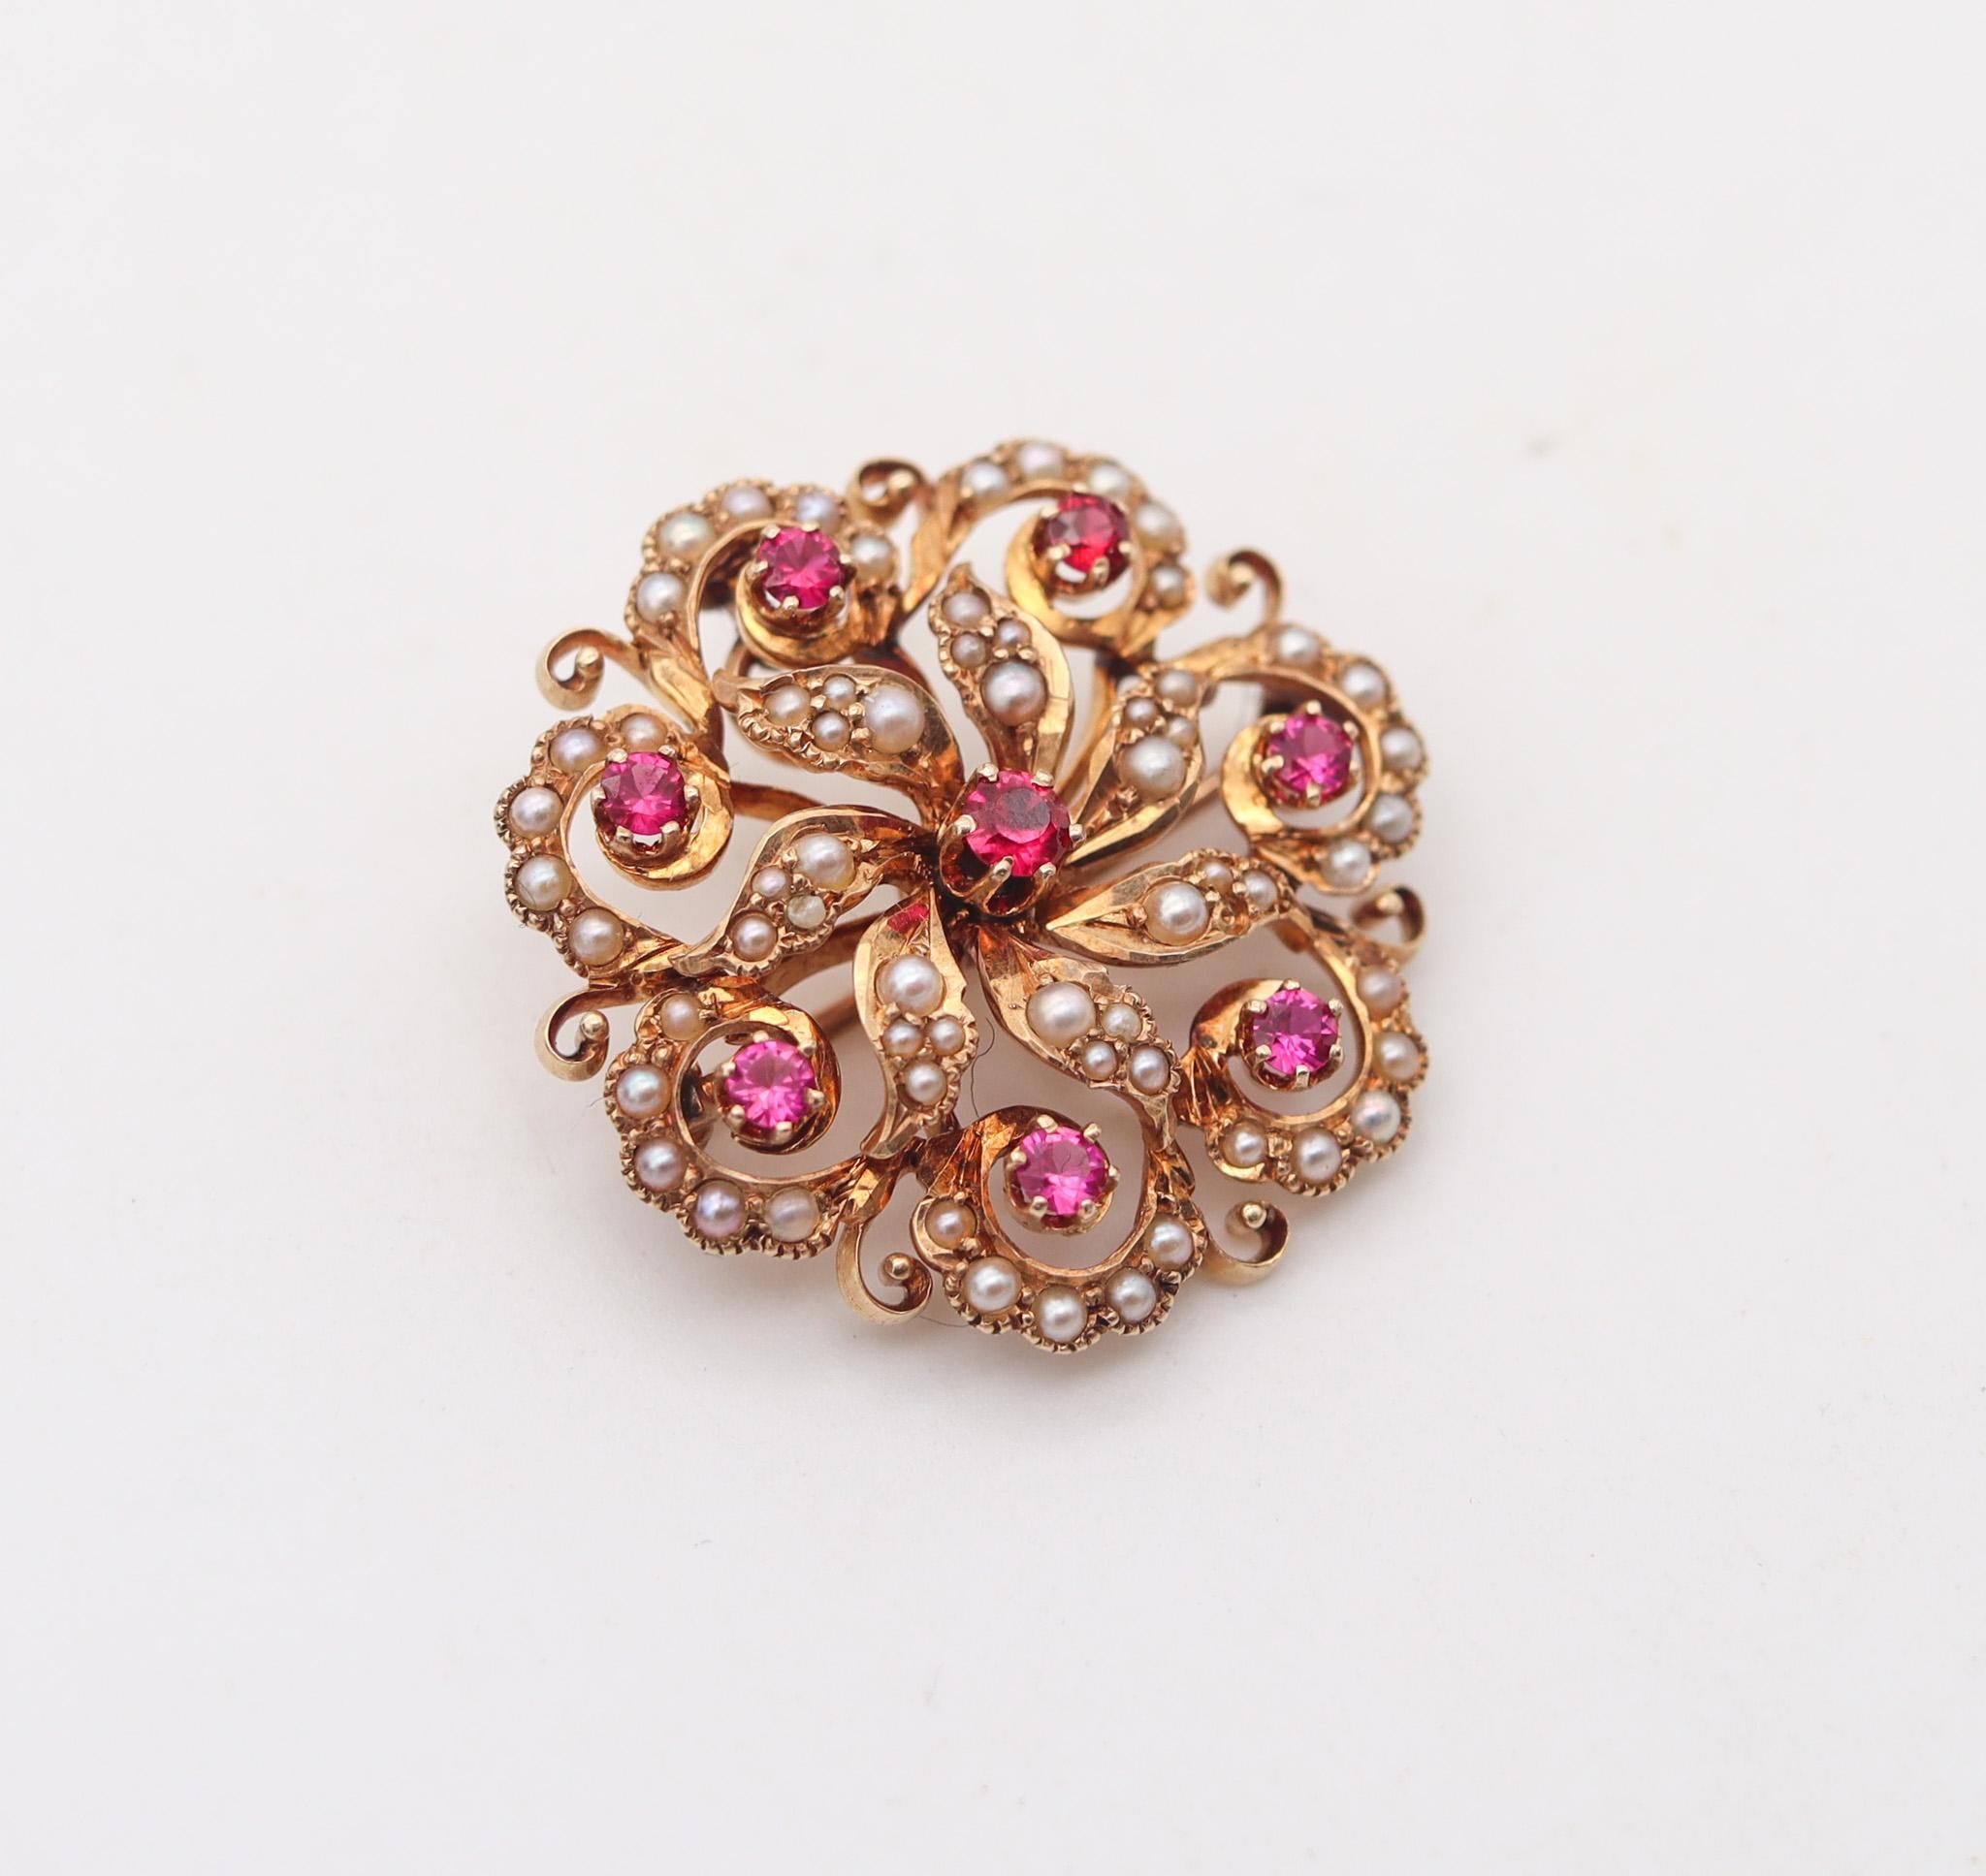 Women's Victorian 1890 Convertible Pendant & Brooch Solid 14Kt Gold With Pearls & Rubies For Sale